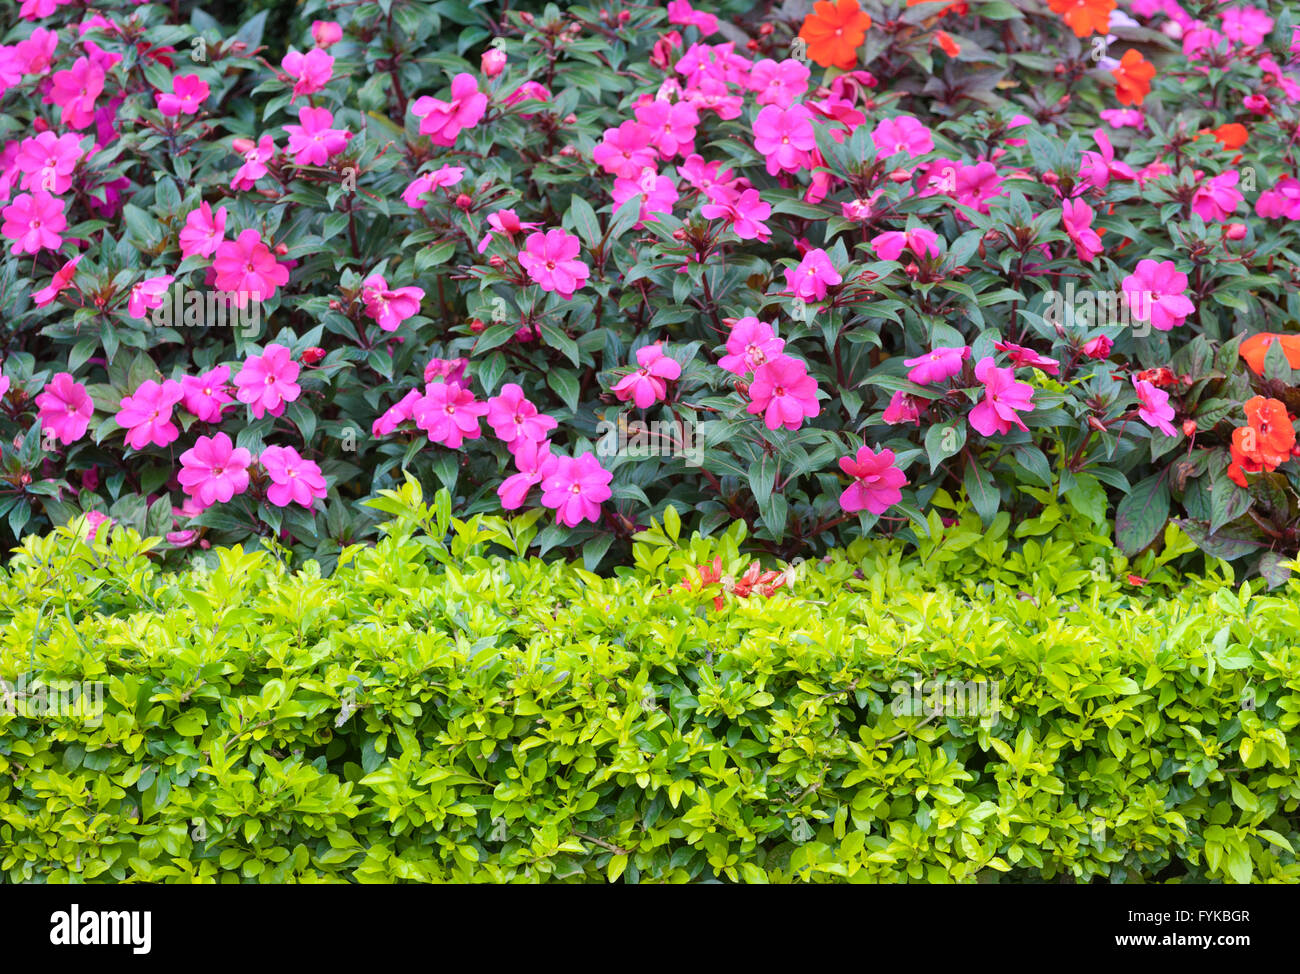 bushes with pink flowers Stock Photo